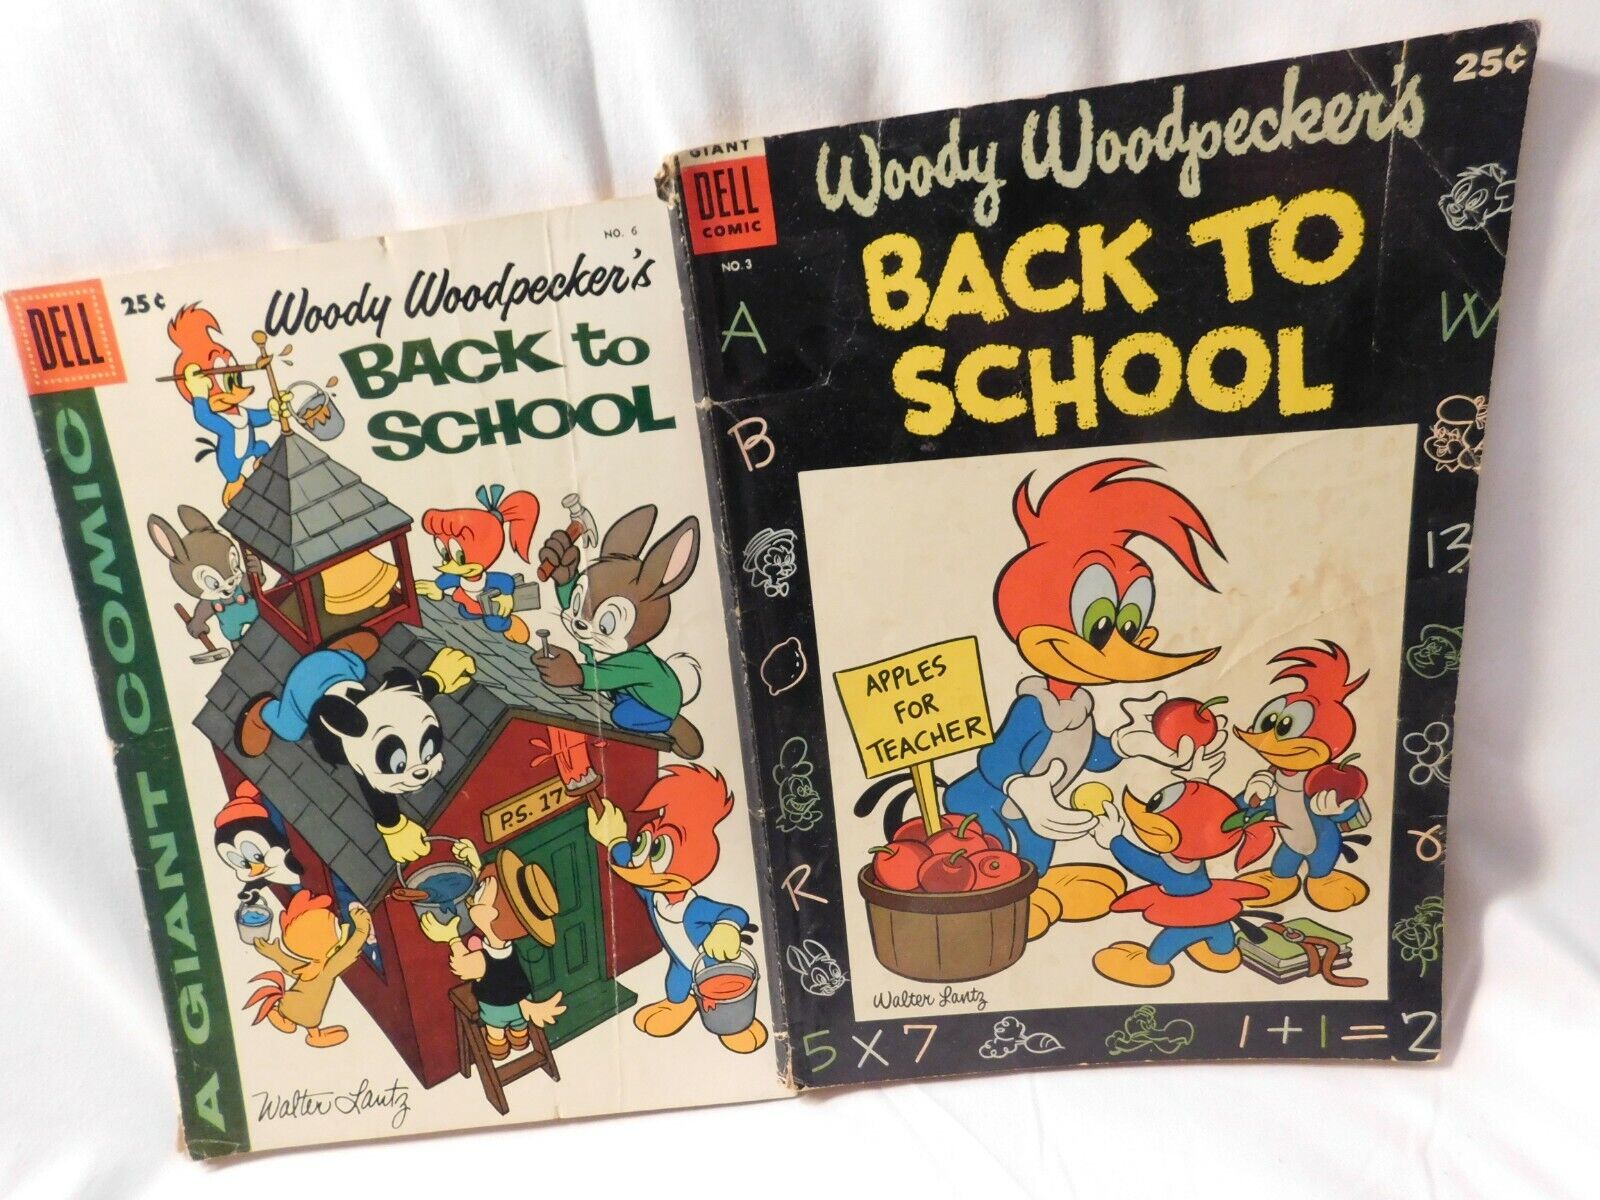 Woody Woodpecker\'s Back to School Dell Giant Comic Books #3 and #6